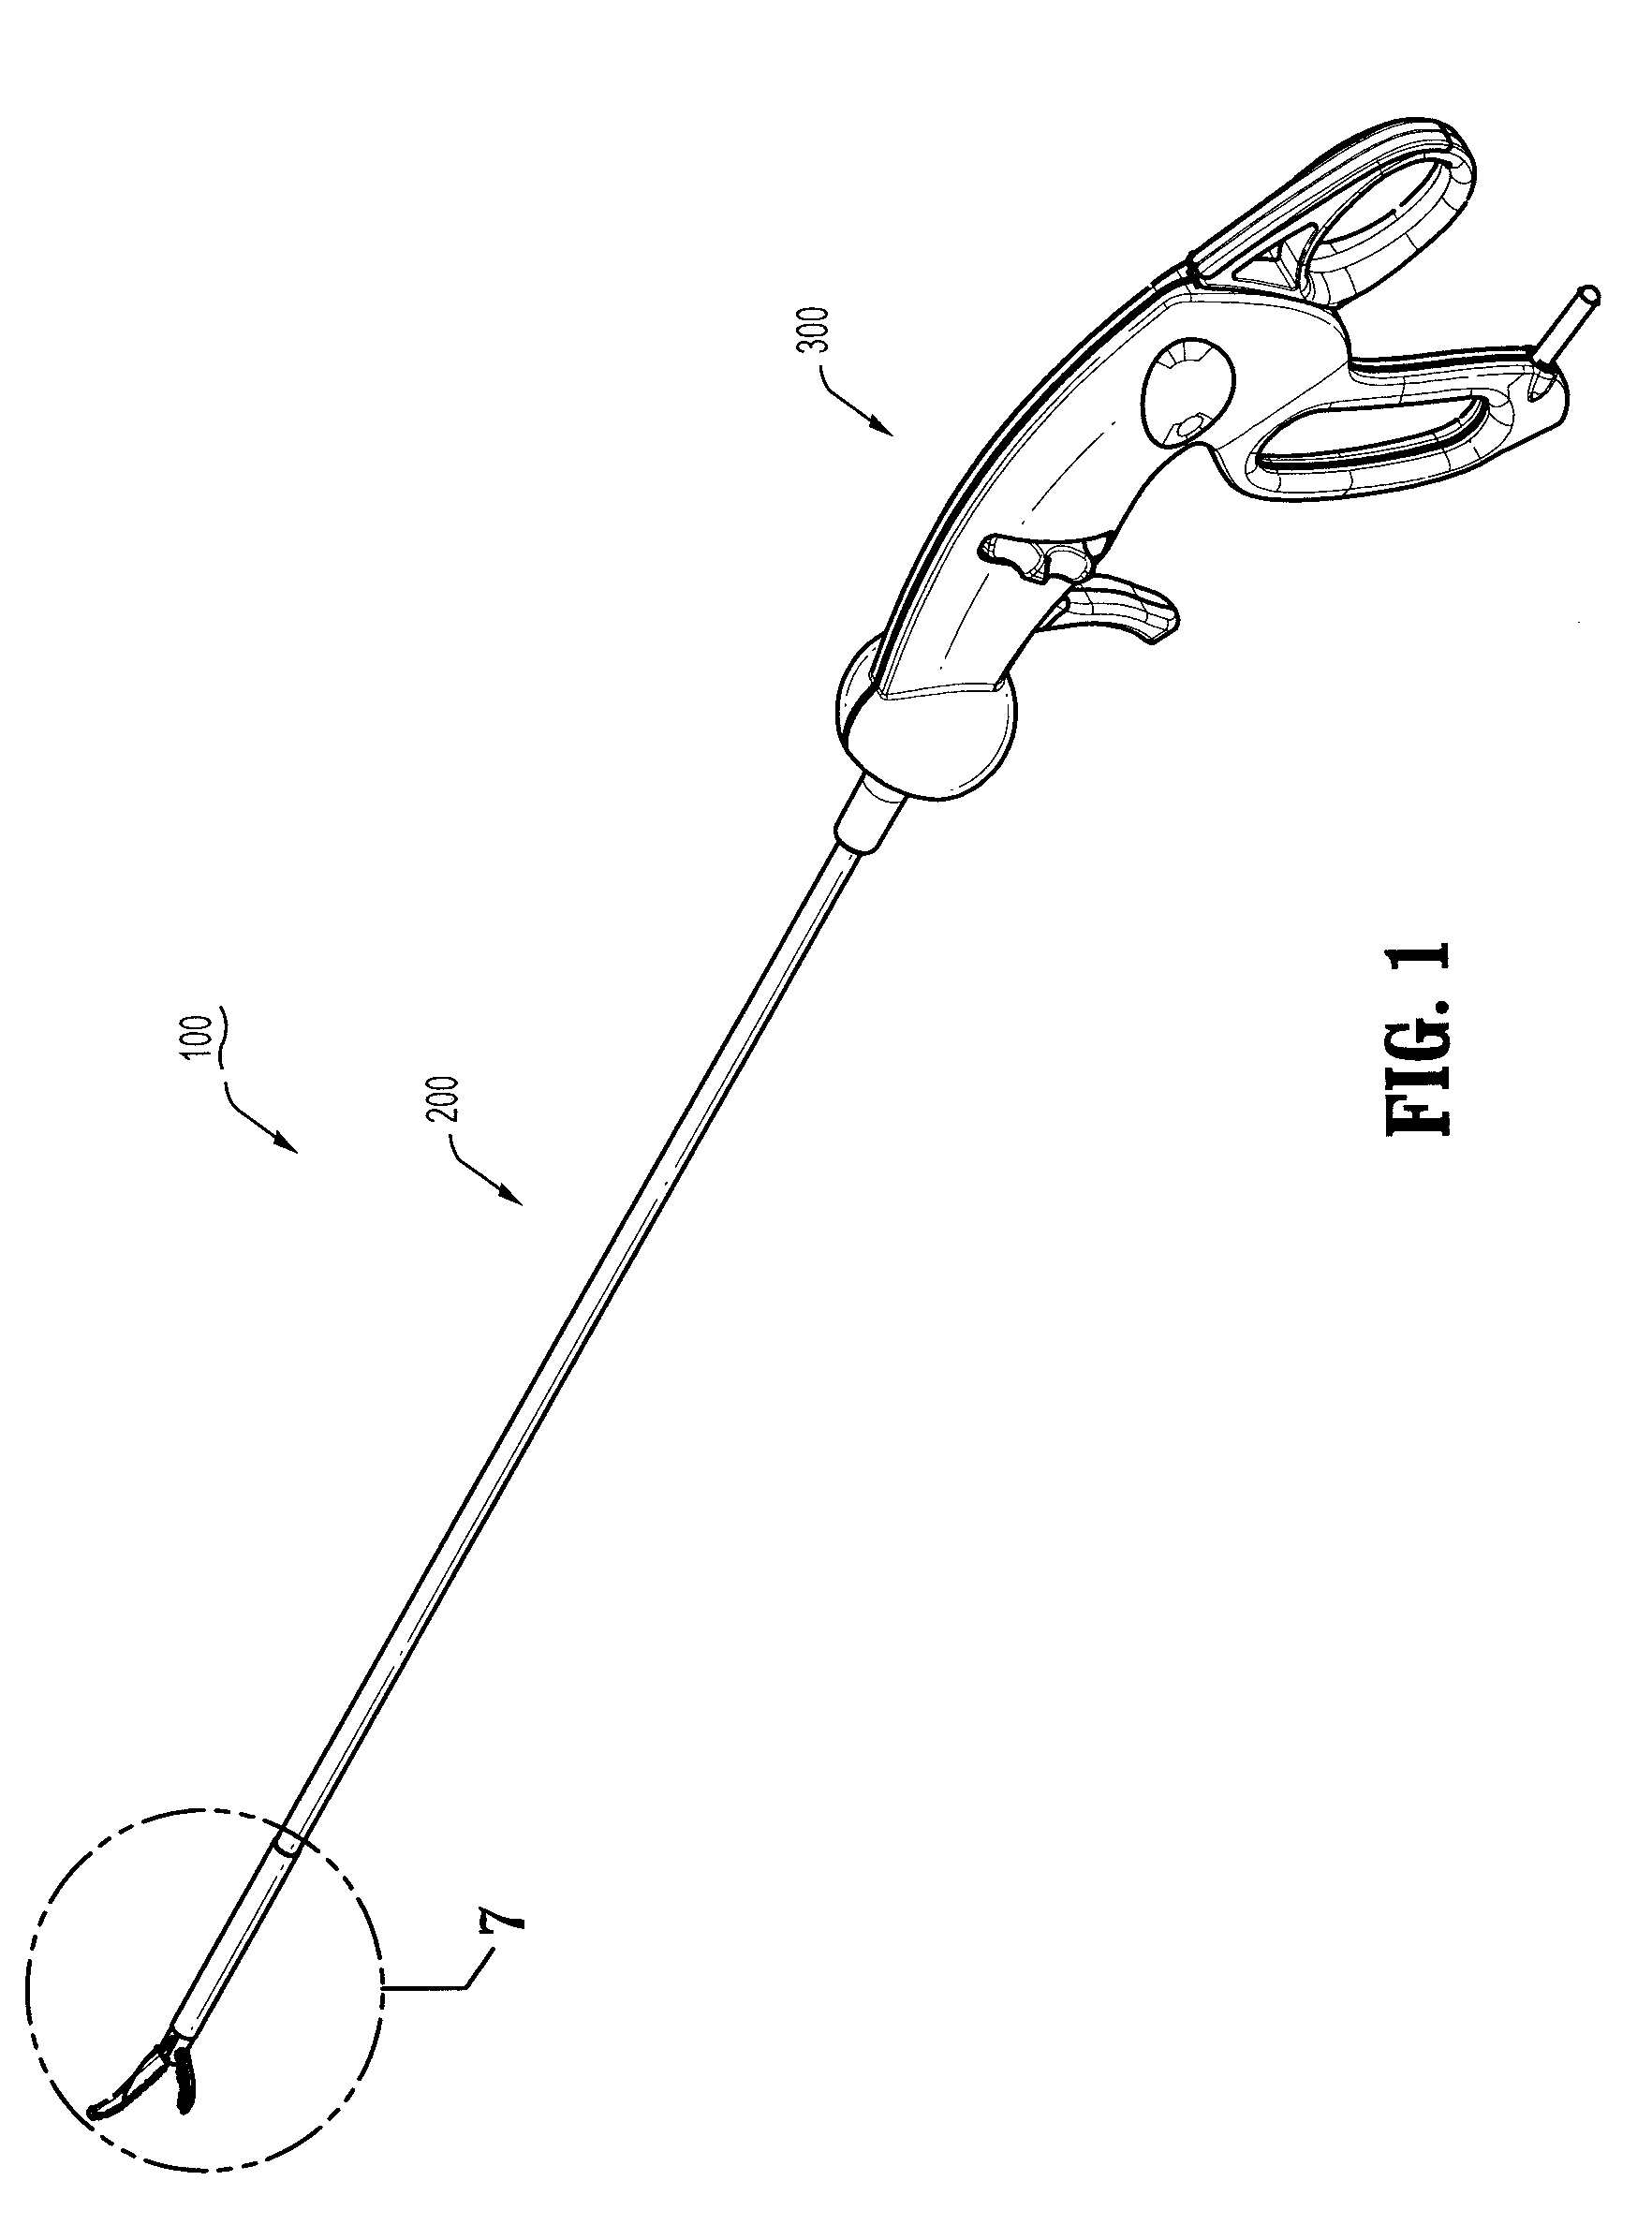 Articulating surgical device